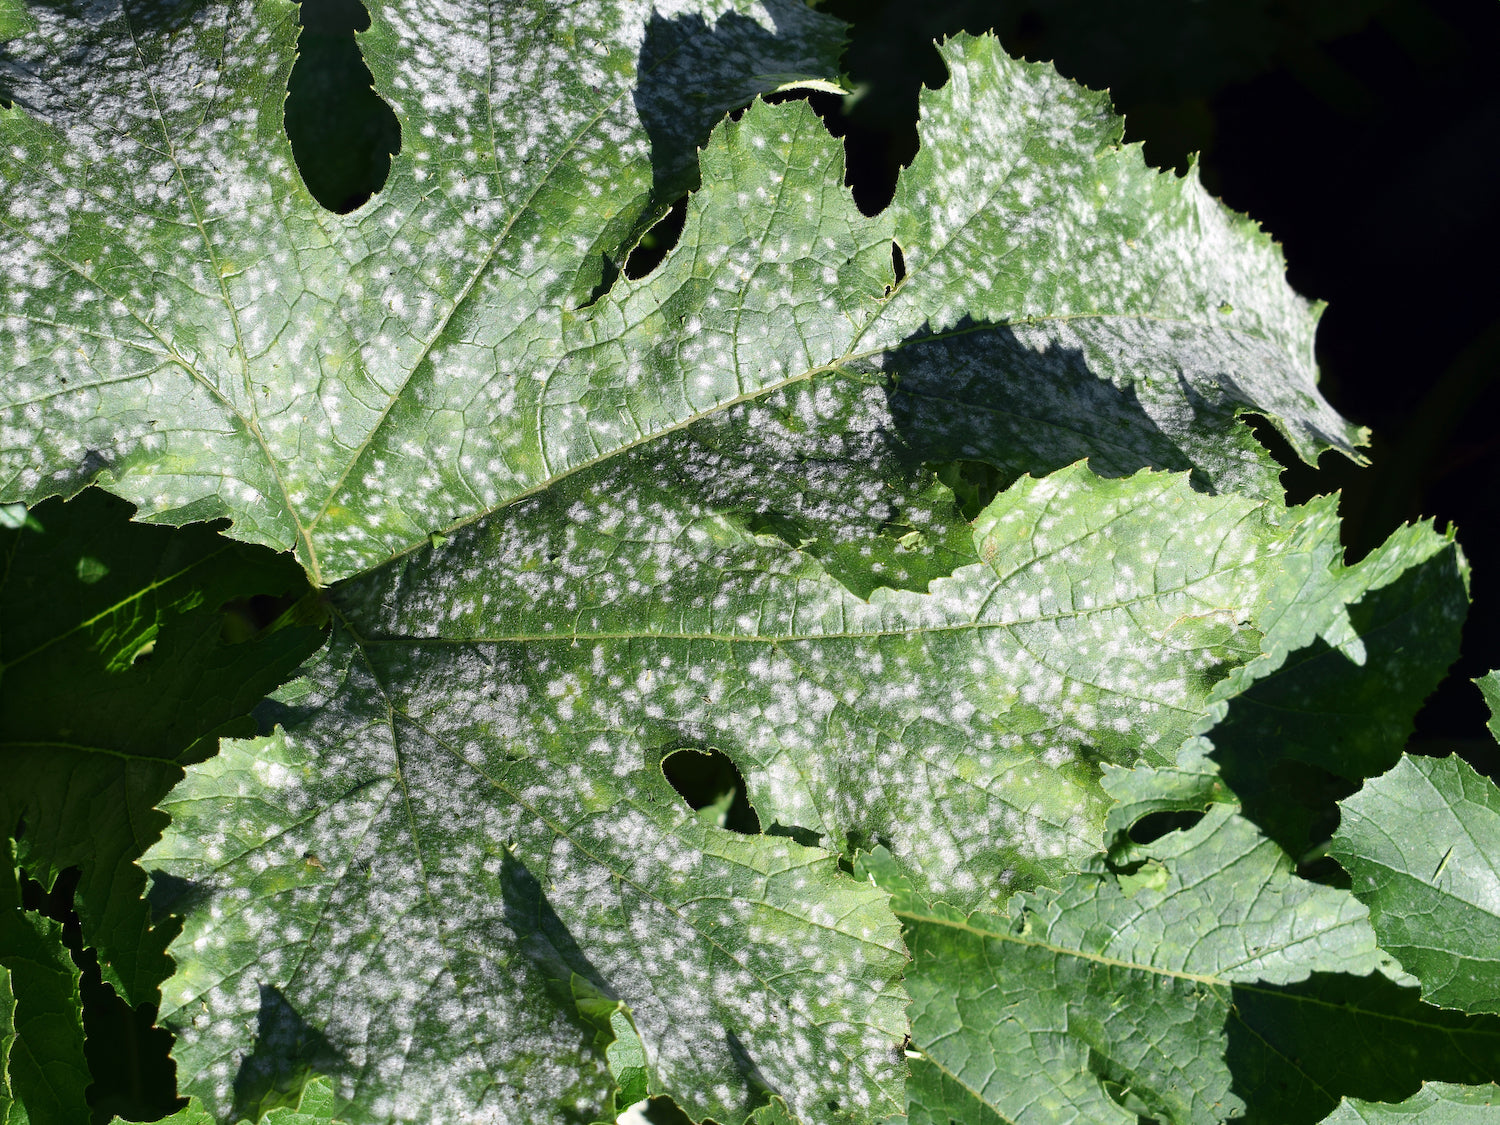 Life Cycle and Management of Powdery Mildew